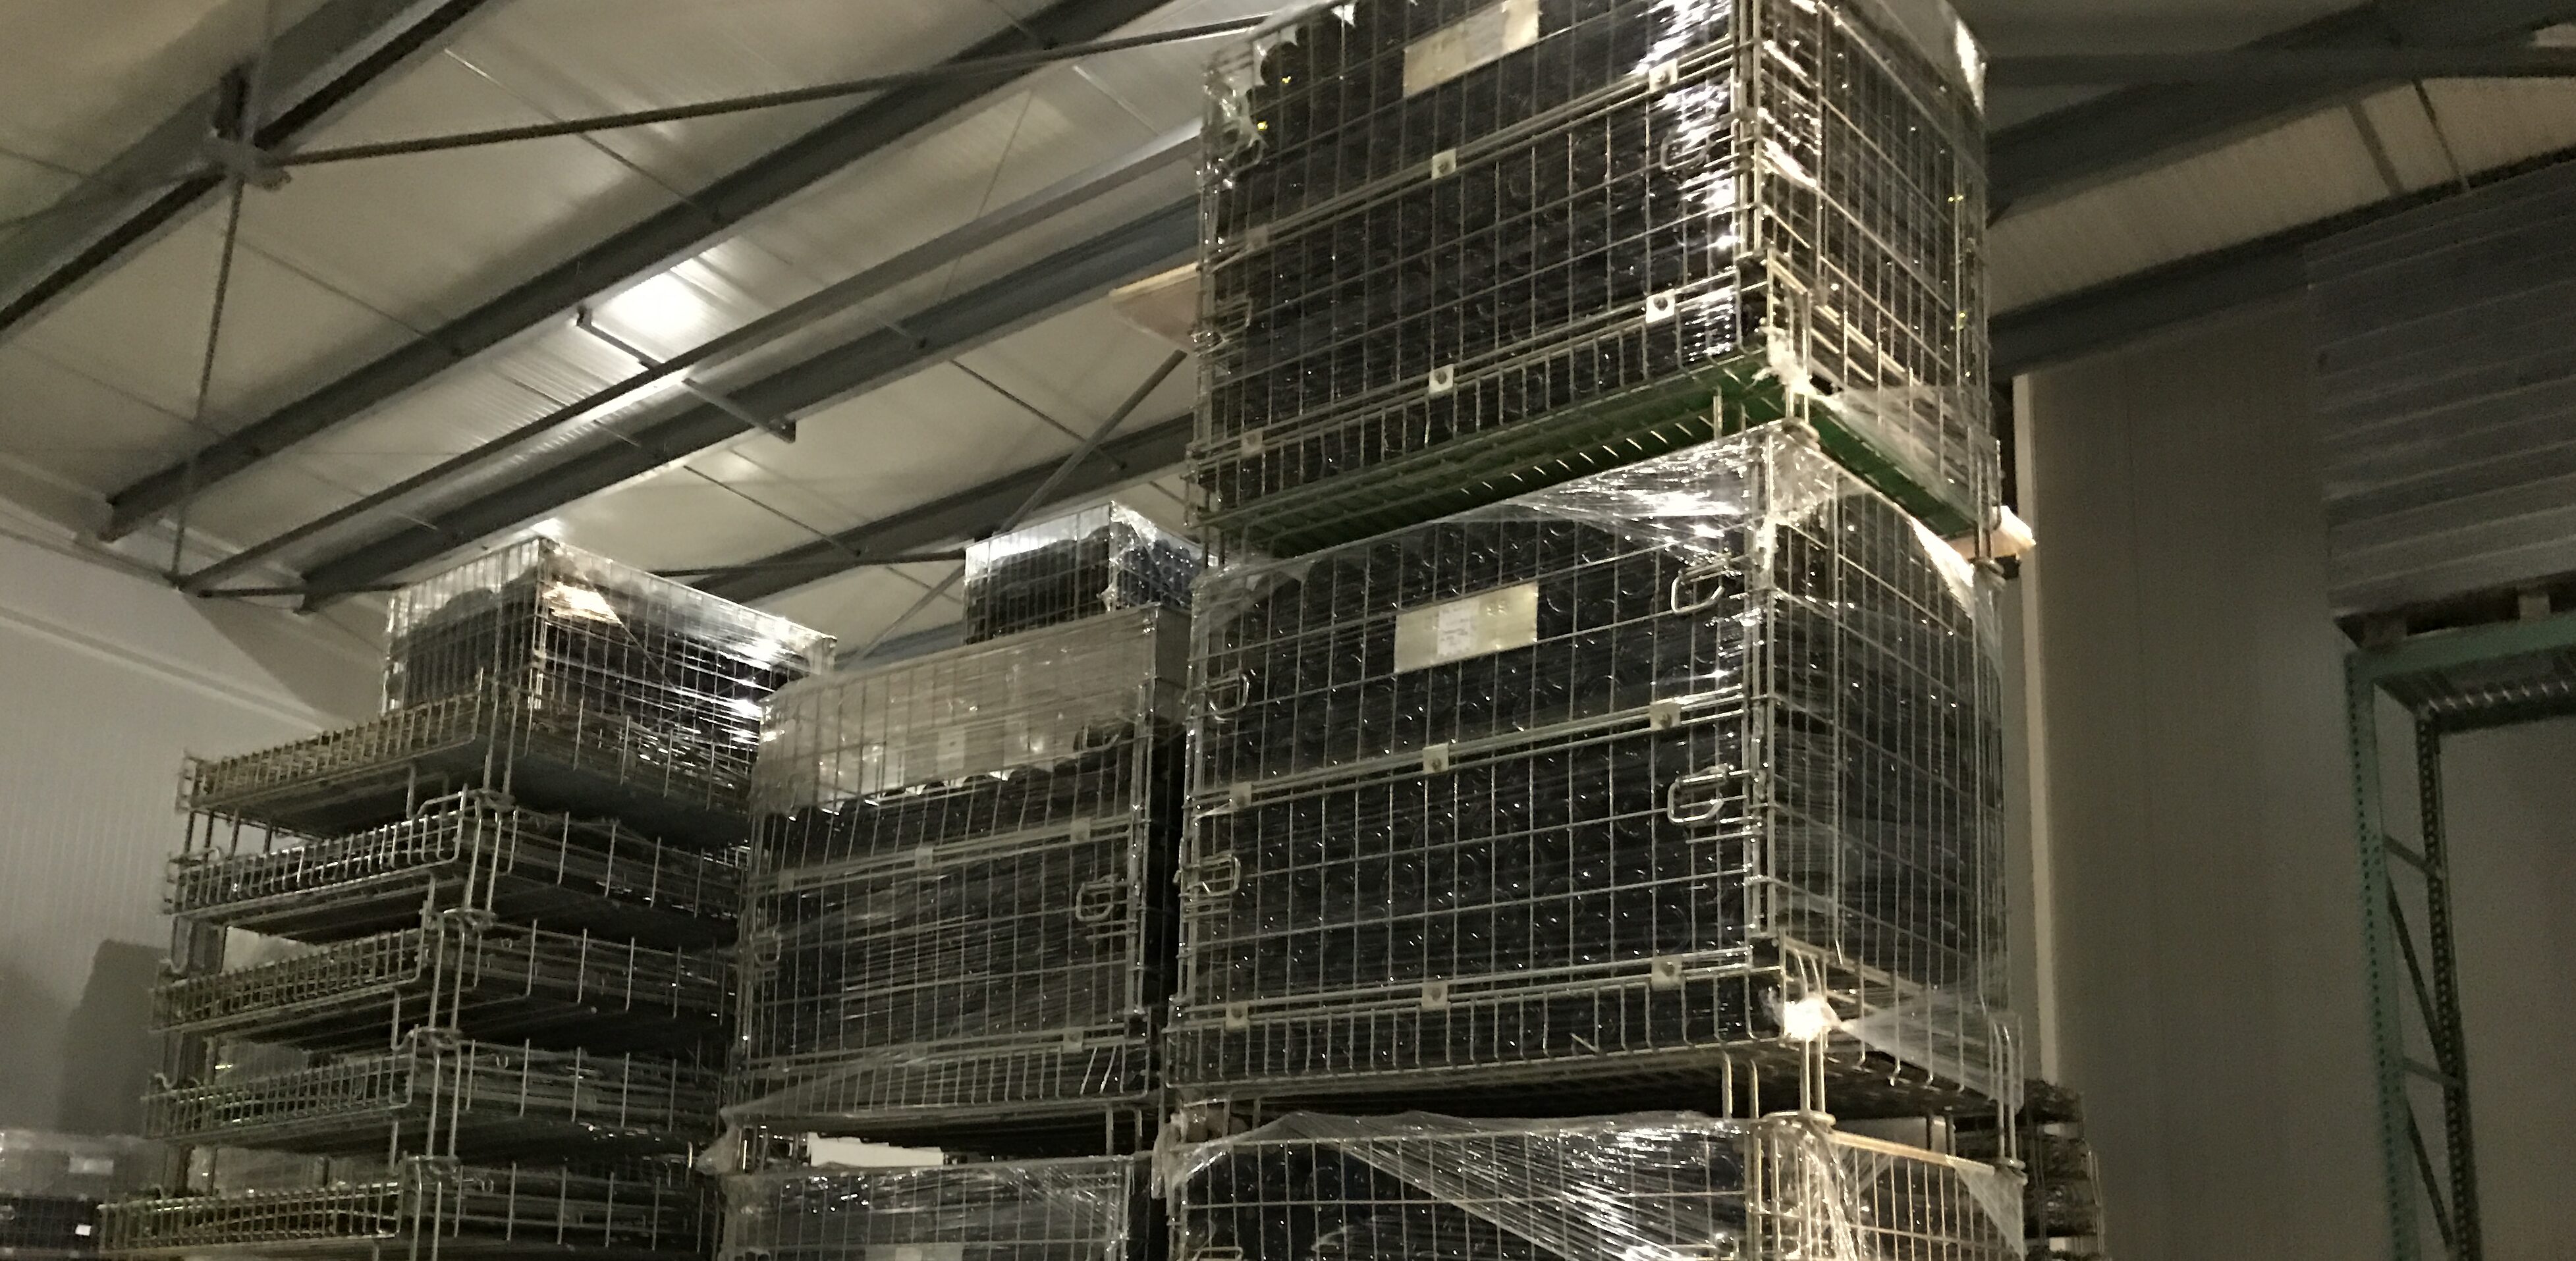 Wire Mesh Containers for Wines, What to Consider Choosing Wire Mesh Containers for Wines